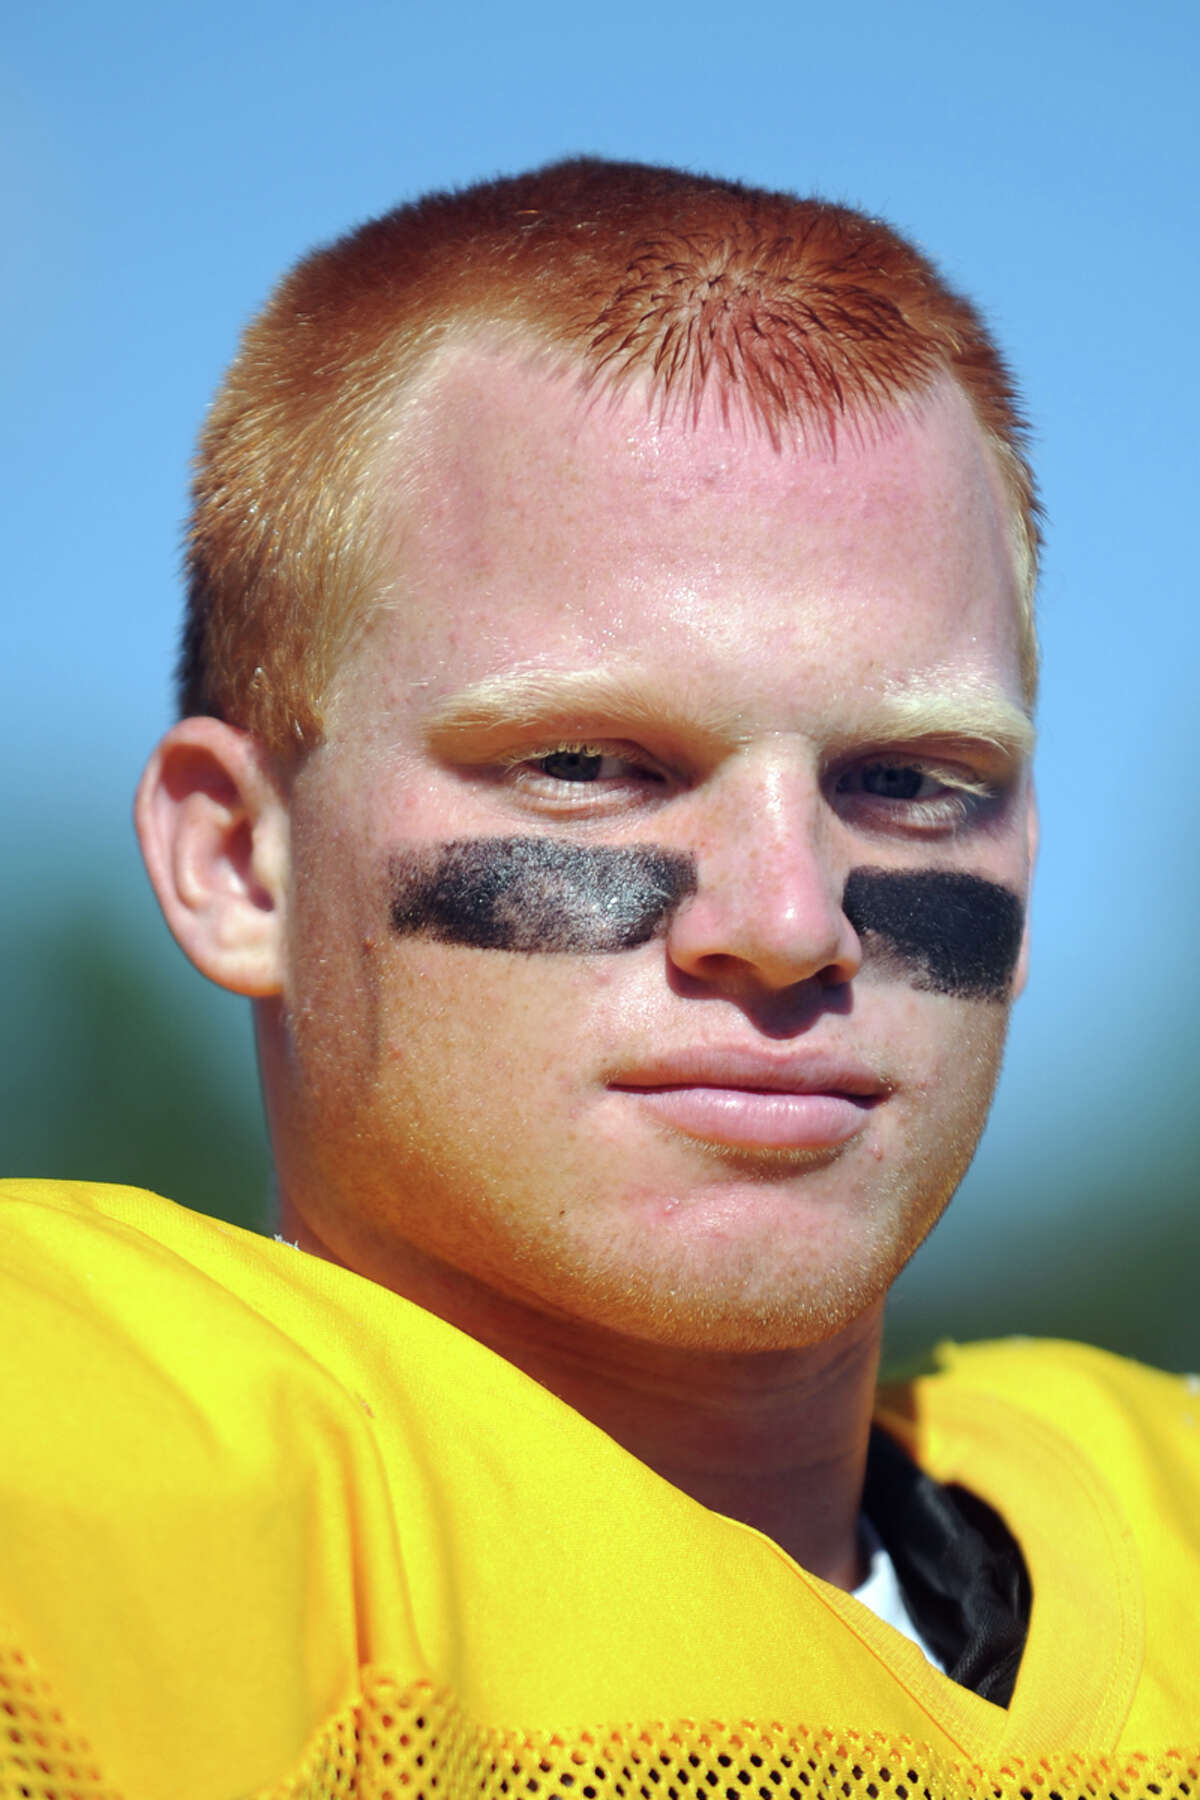 Temple football player Tyler Matakevich out of St. Joseph.